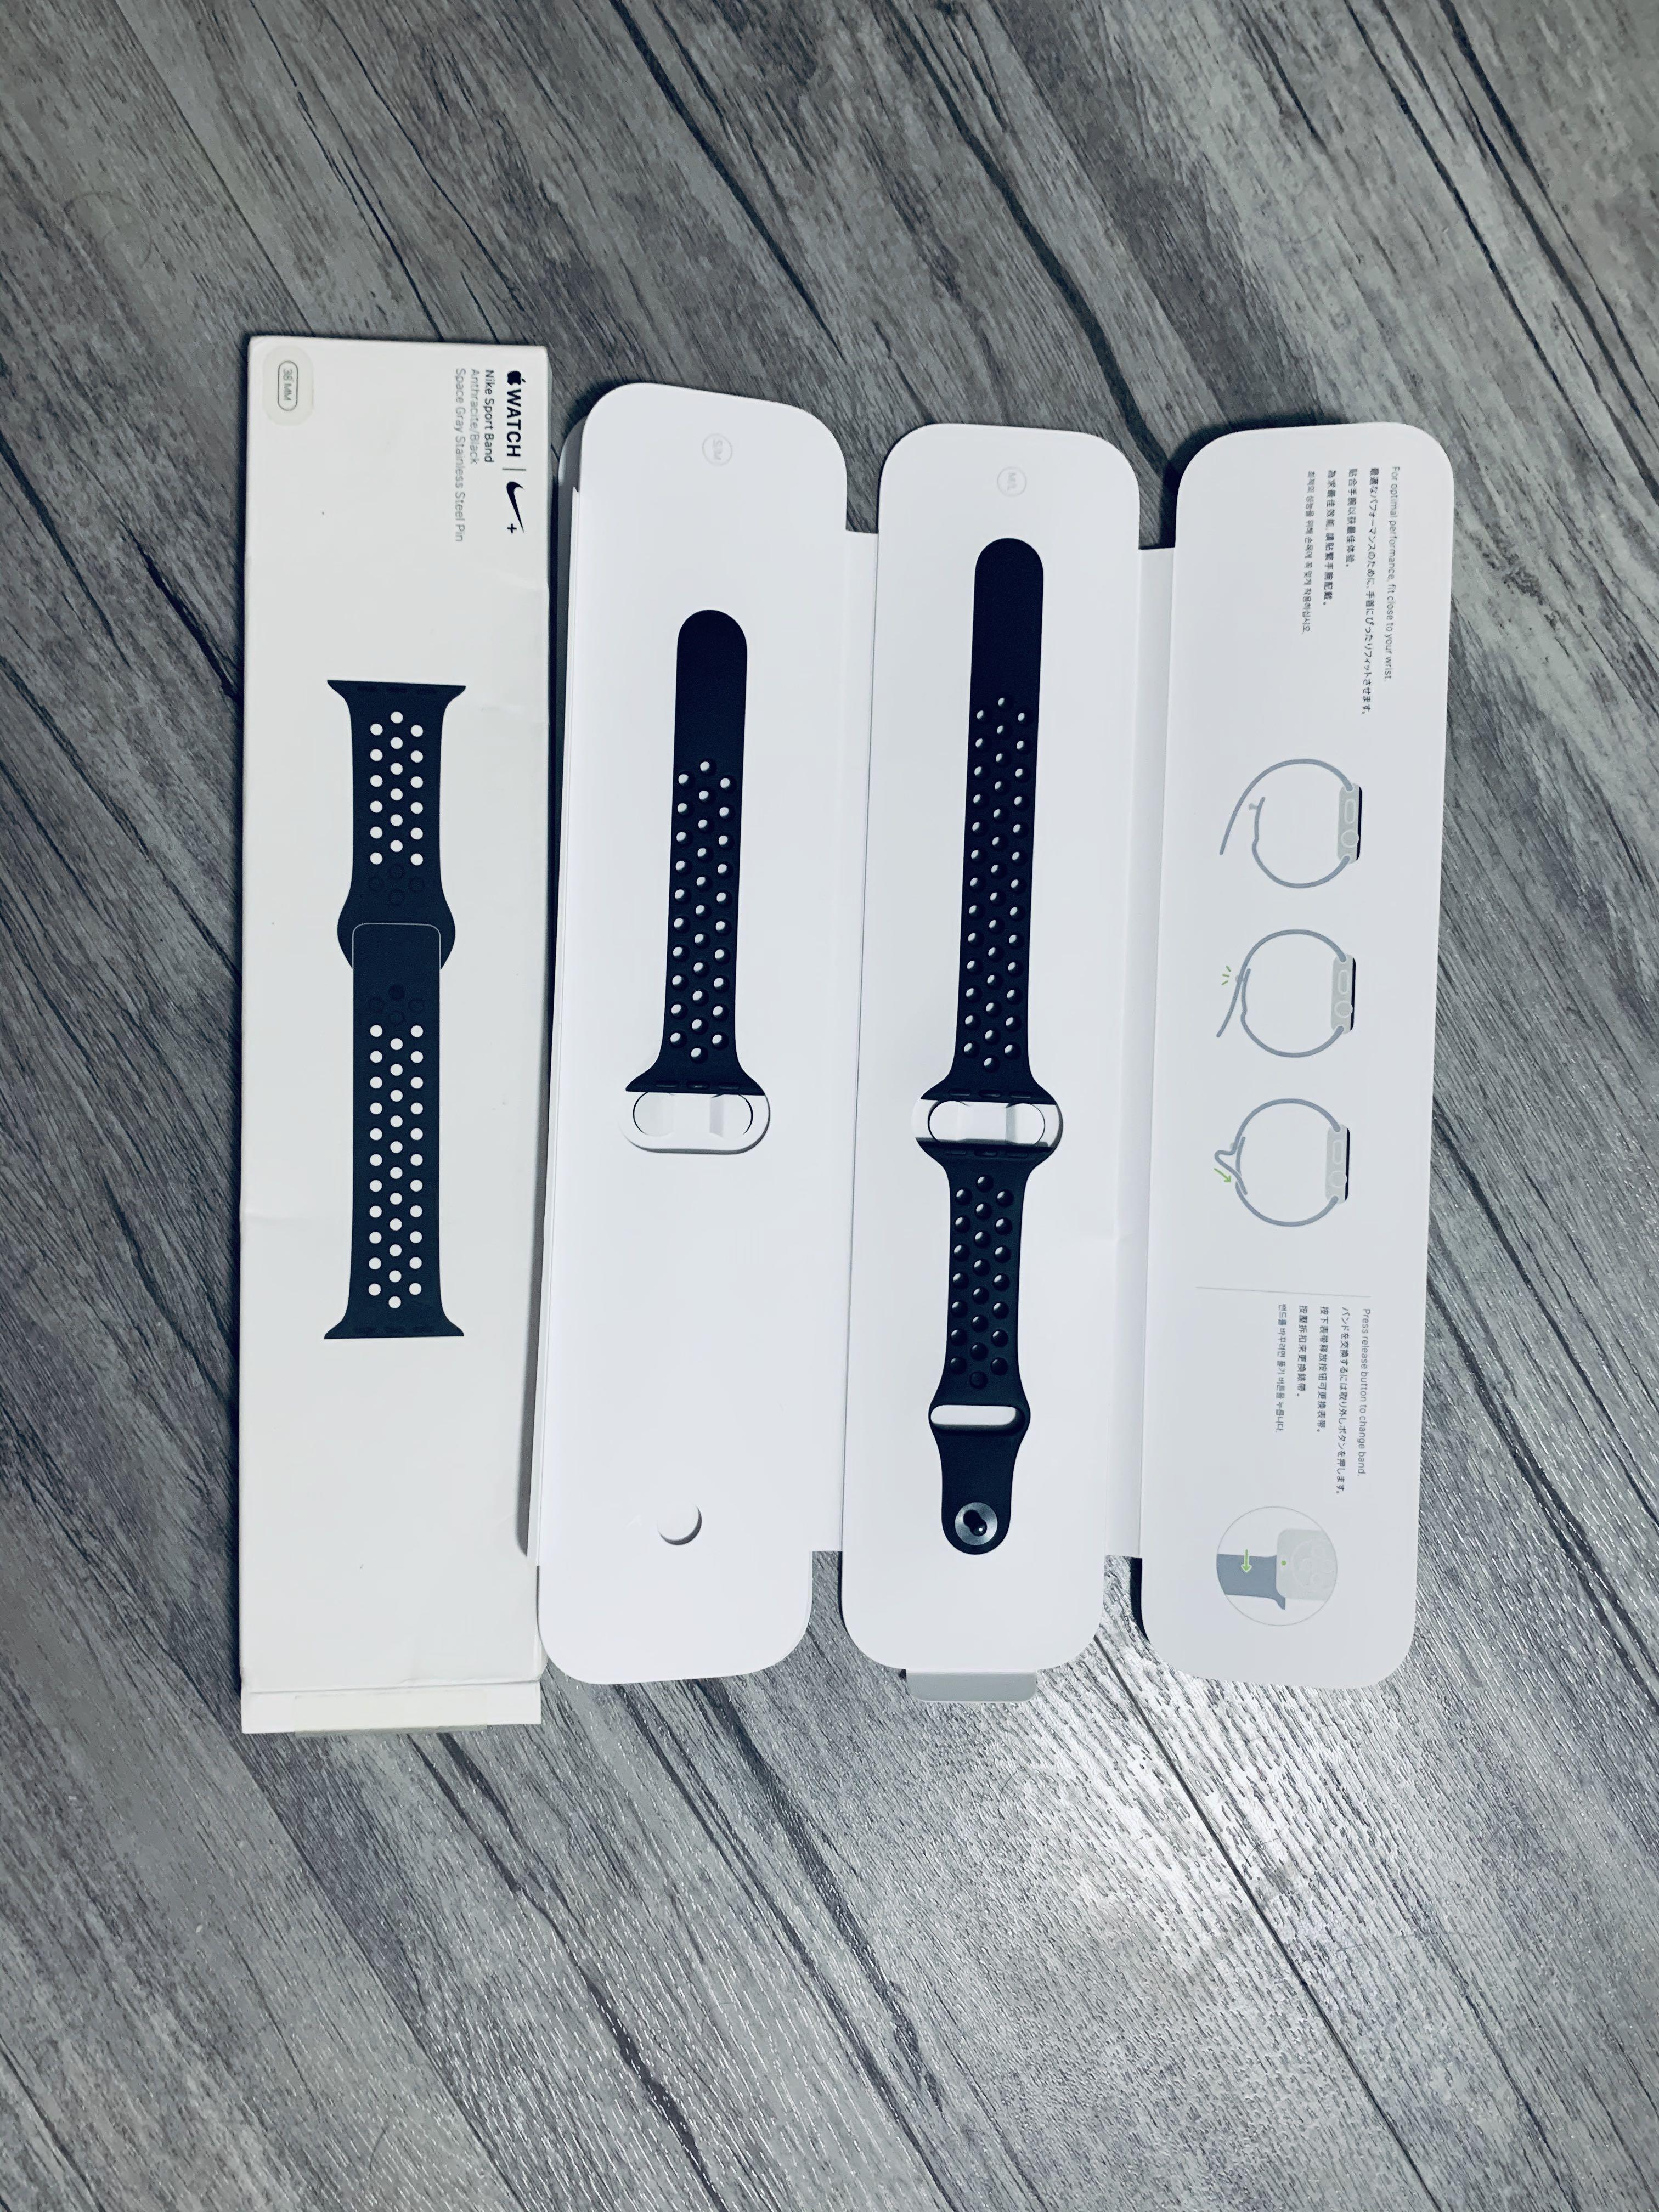 anthracite sport band